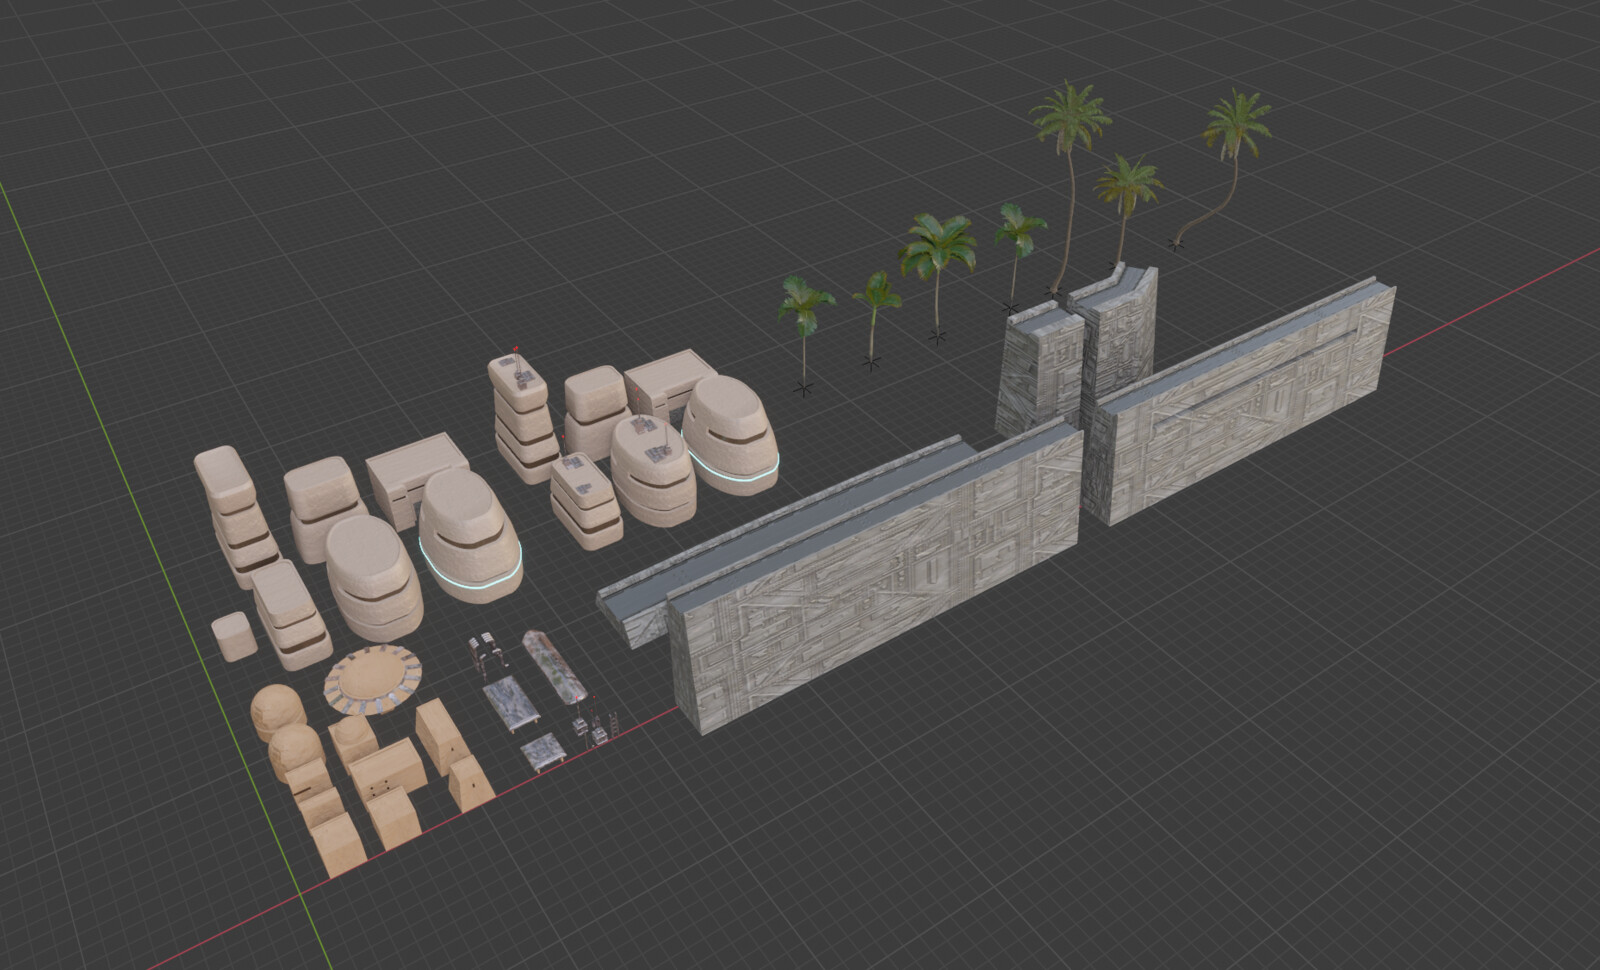 Modeled and Textured Low-poly Assets (Palm trees from Botaniq Add-On)